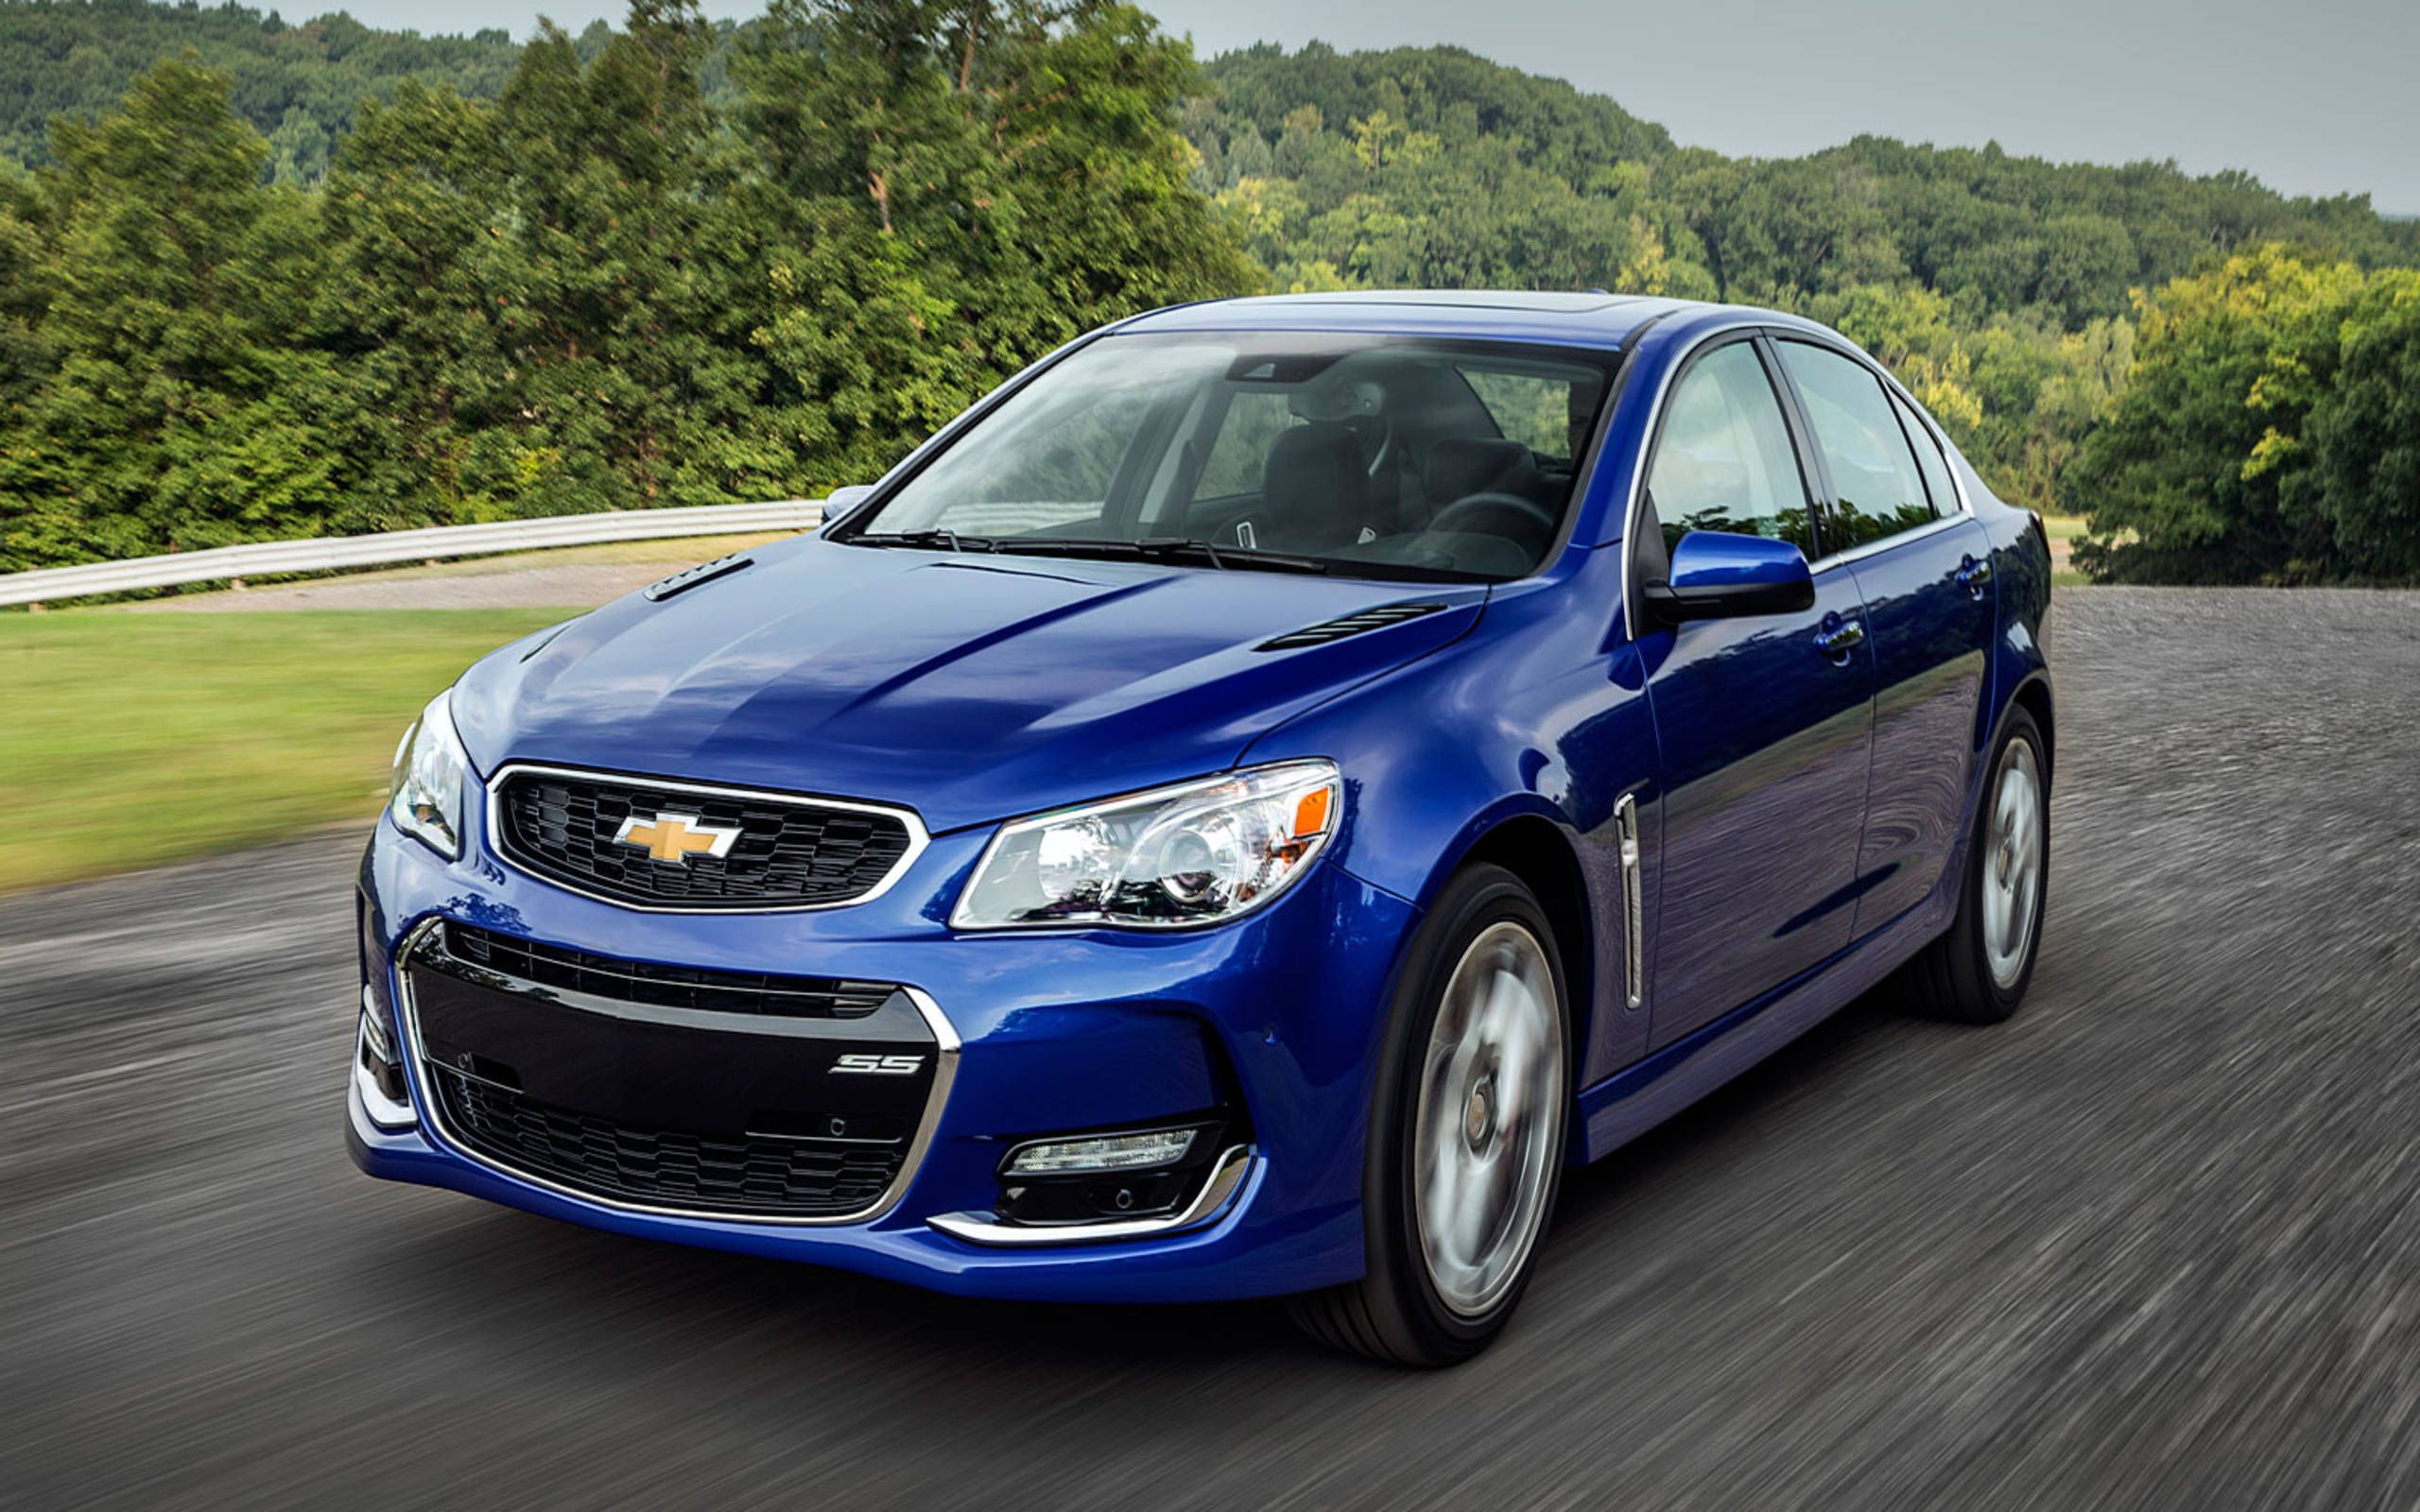 2016 Chevy SS first drive: Baby's first sports sedan